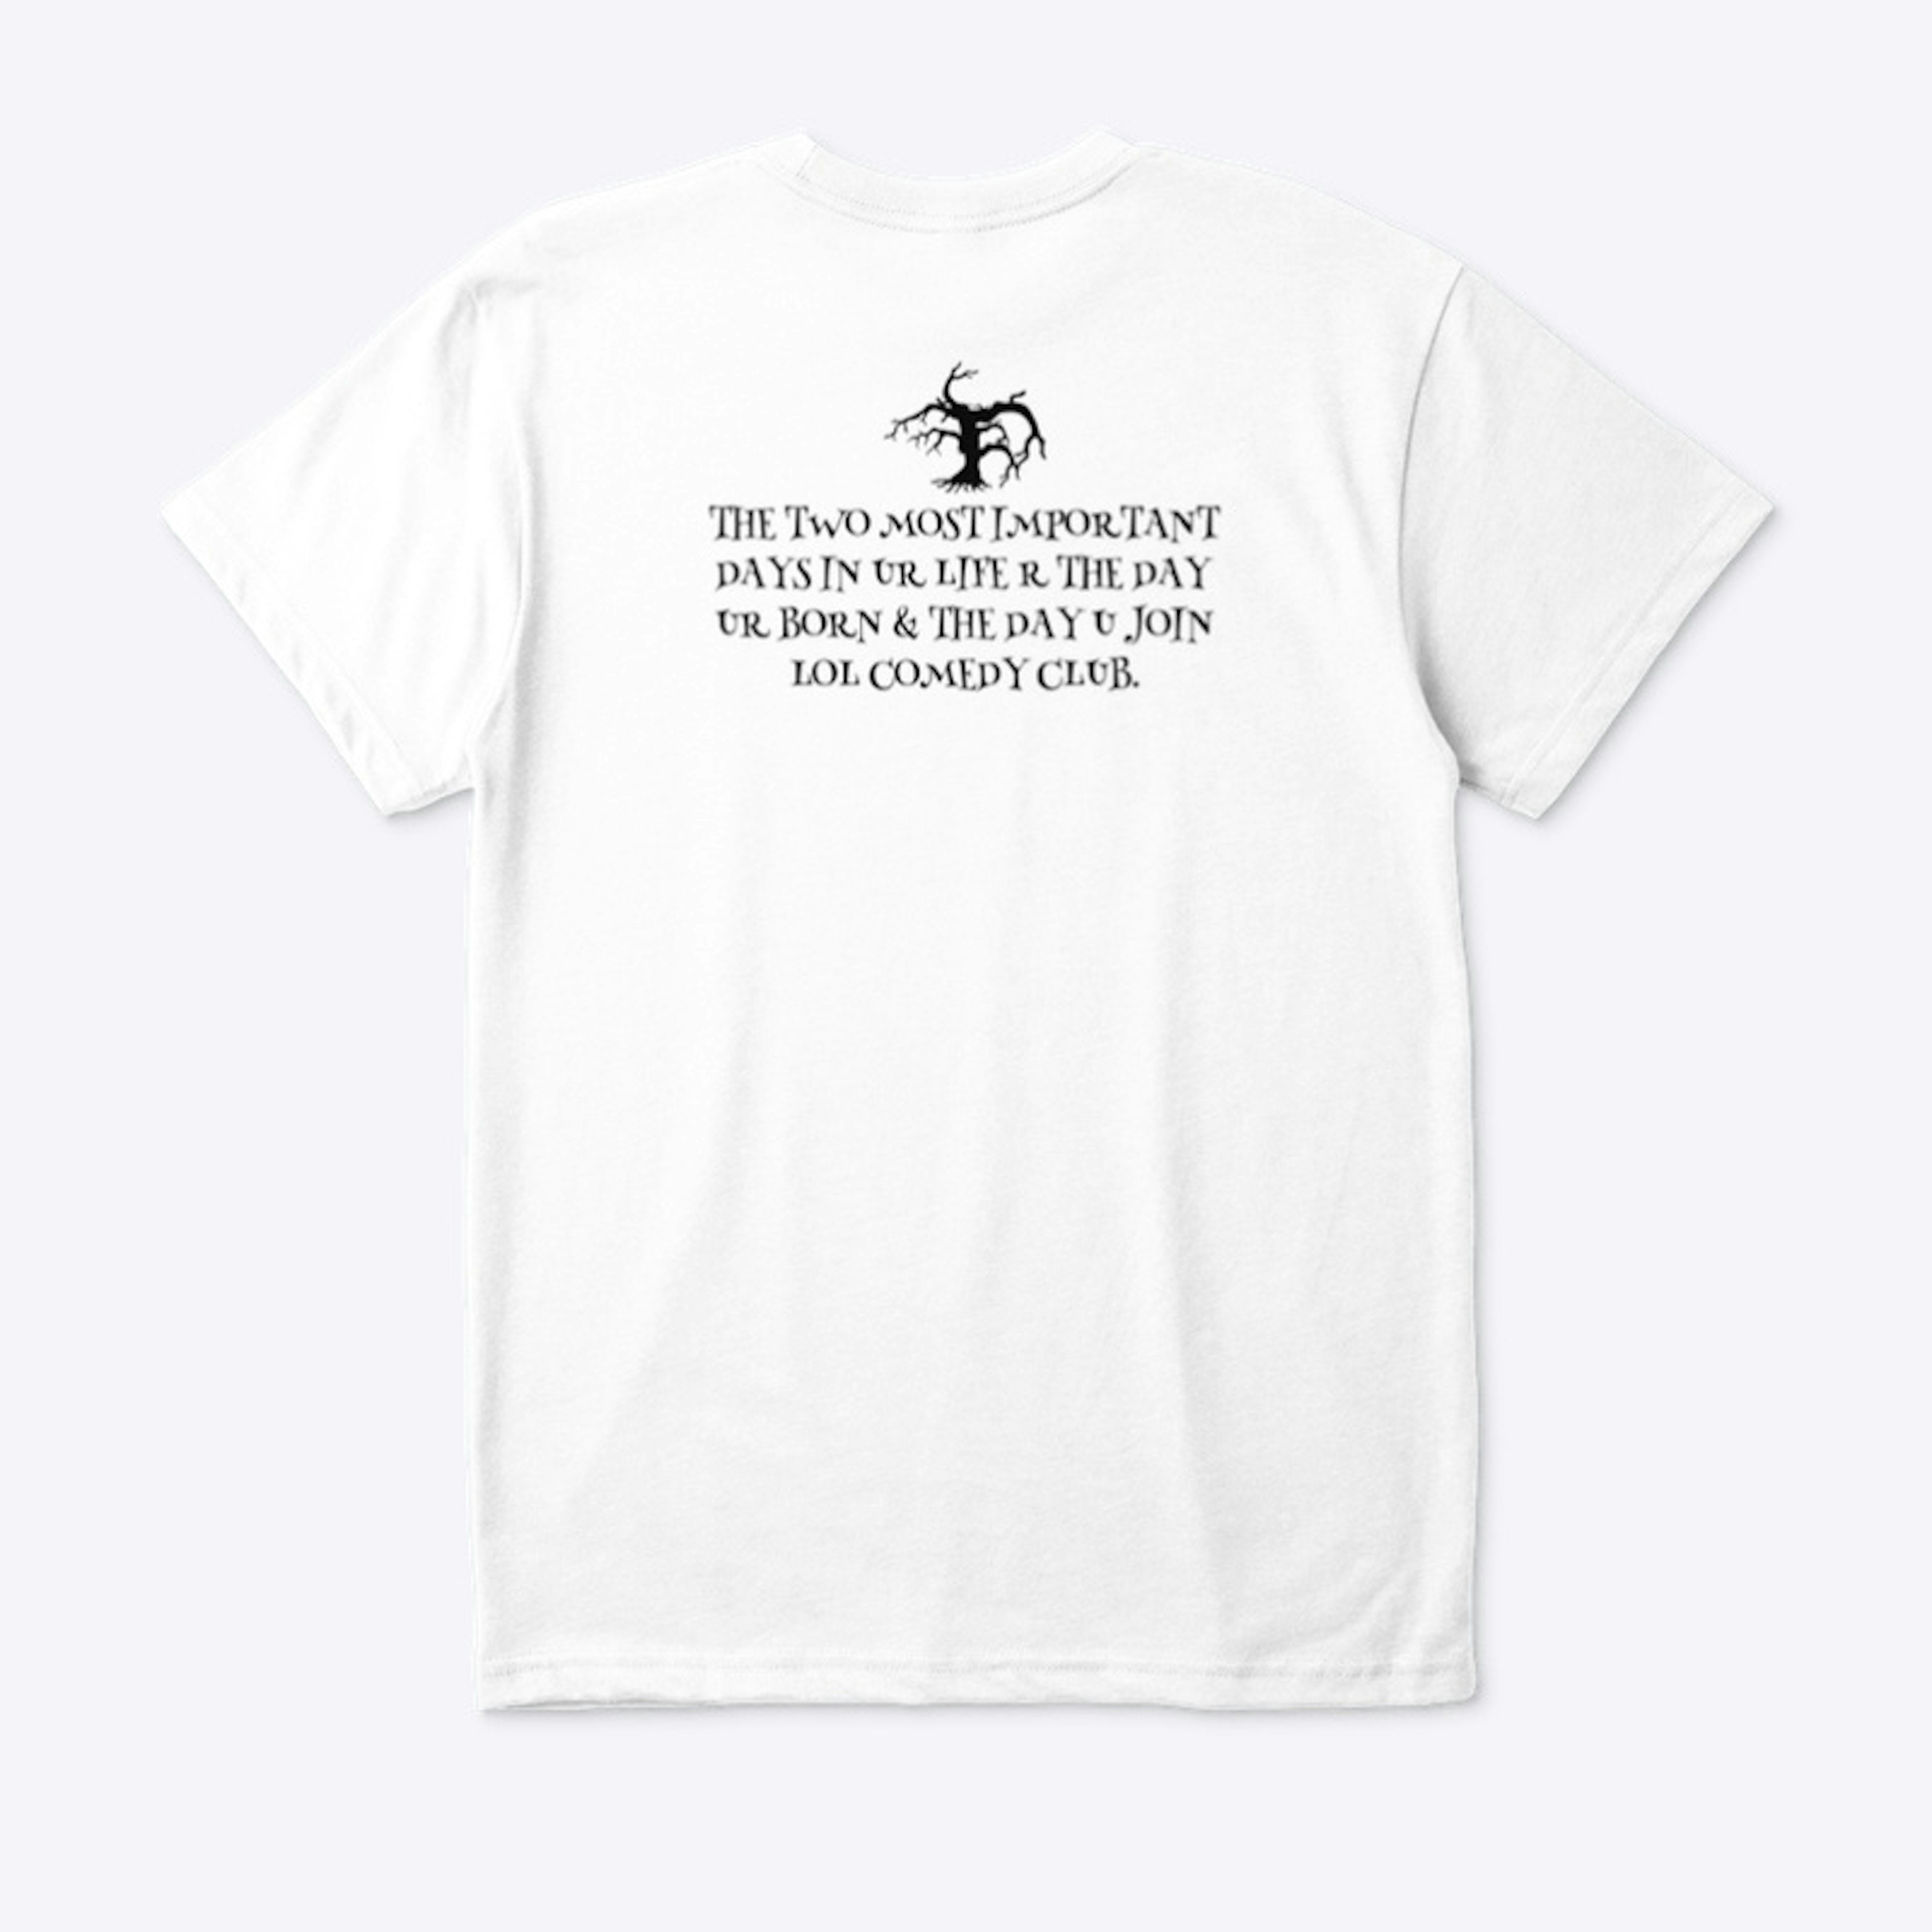 The Two Most Important Days Tee